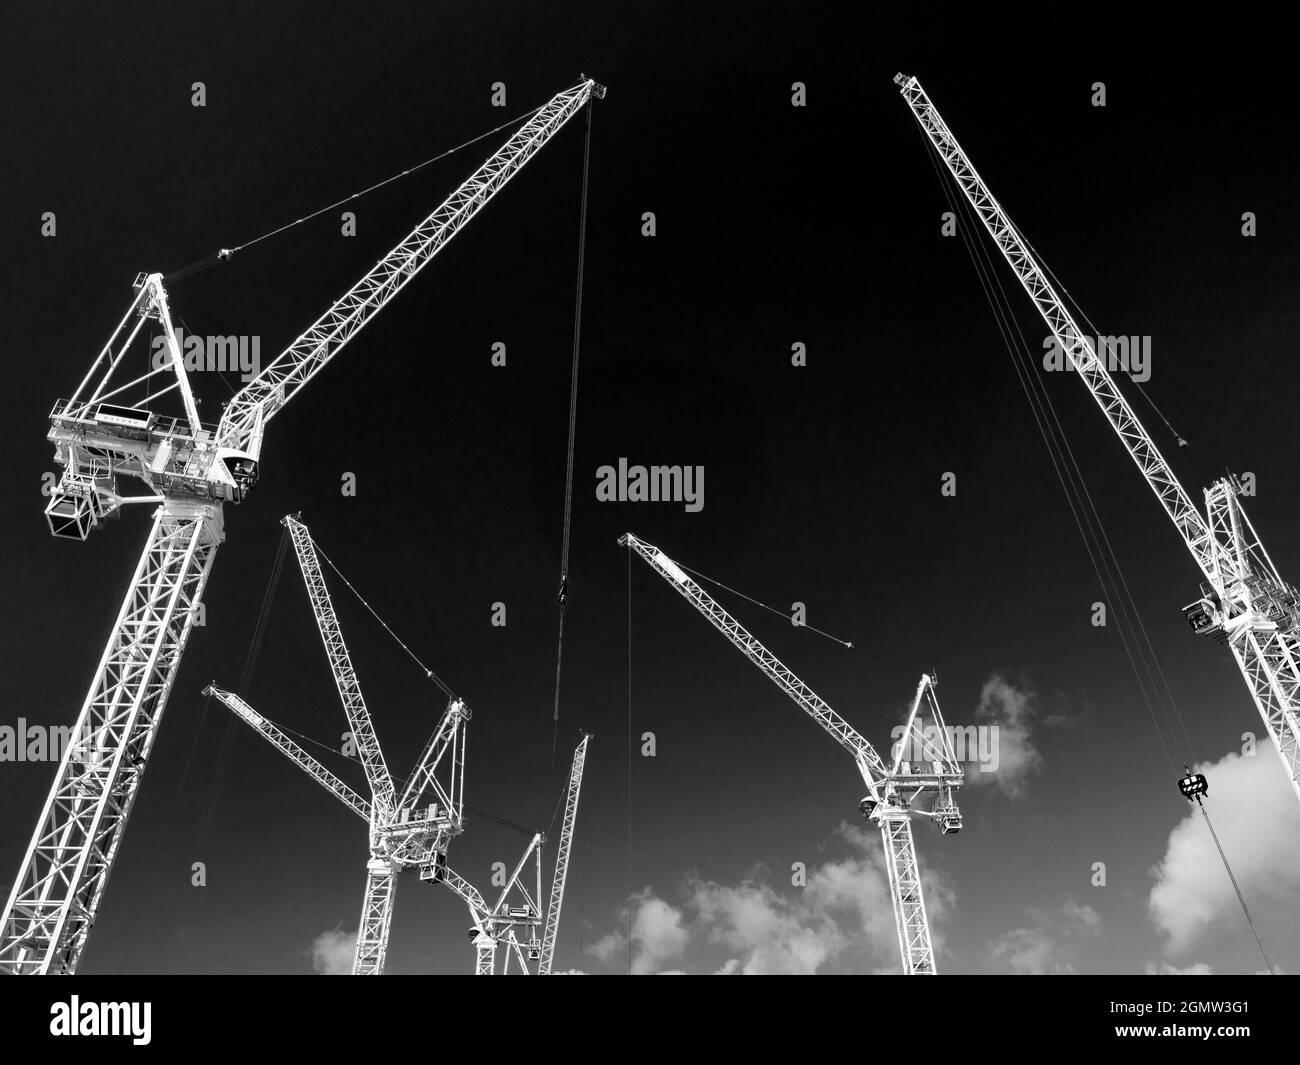 These mammoth cranes are all at work on Oxford's giant Westgate development project. Delayed for many years by the financial recession, it is now fina Stock Photo